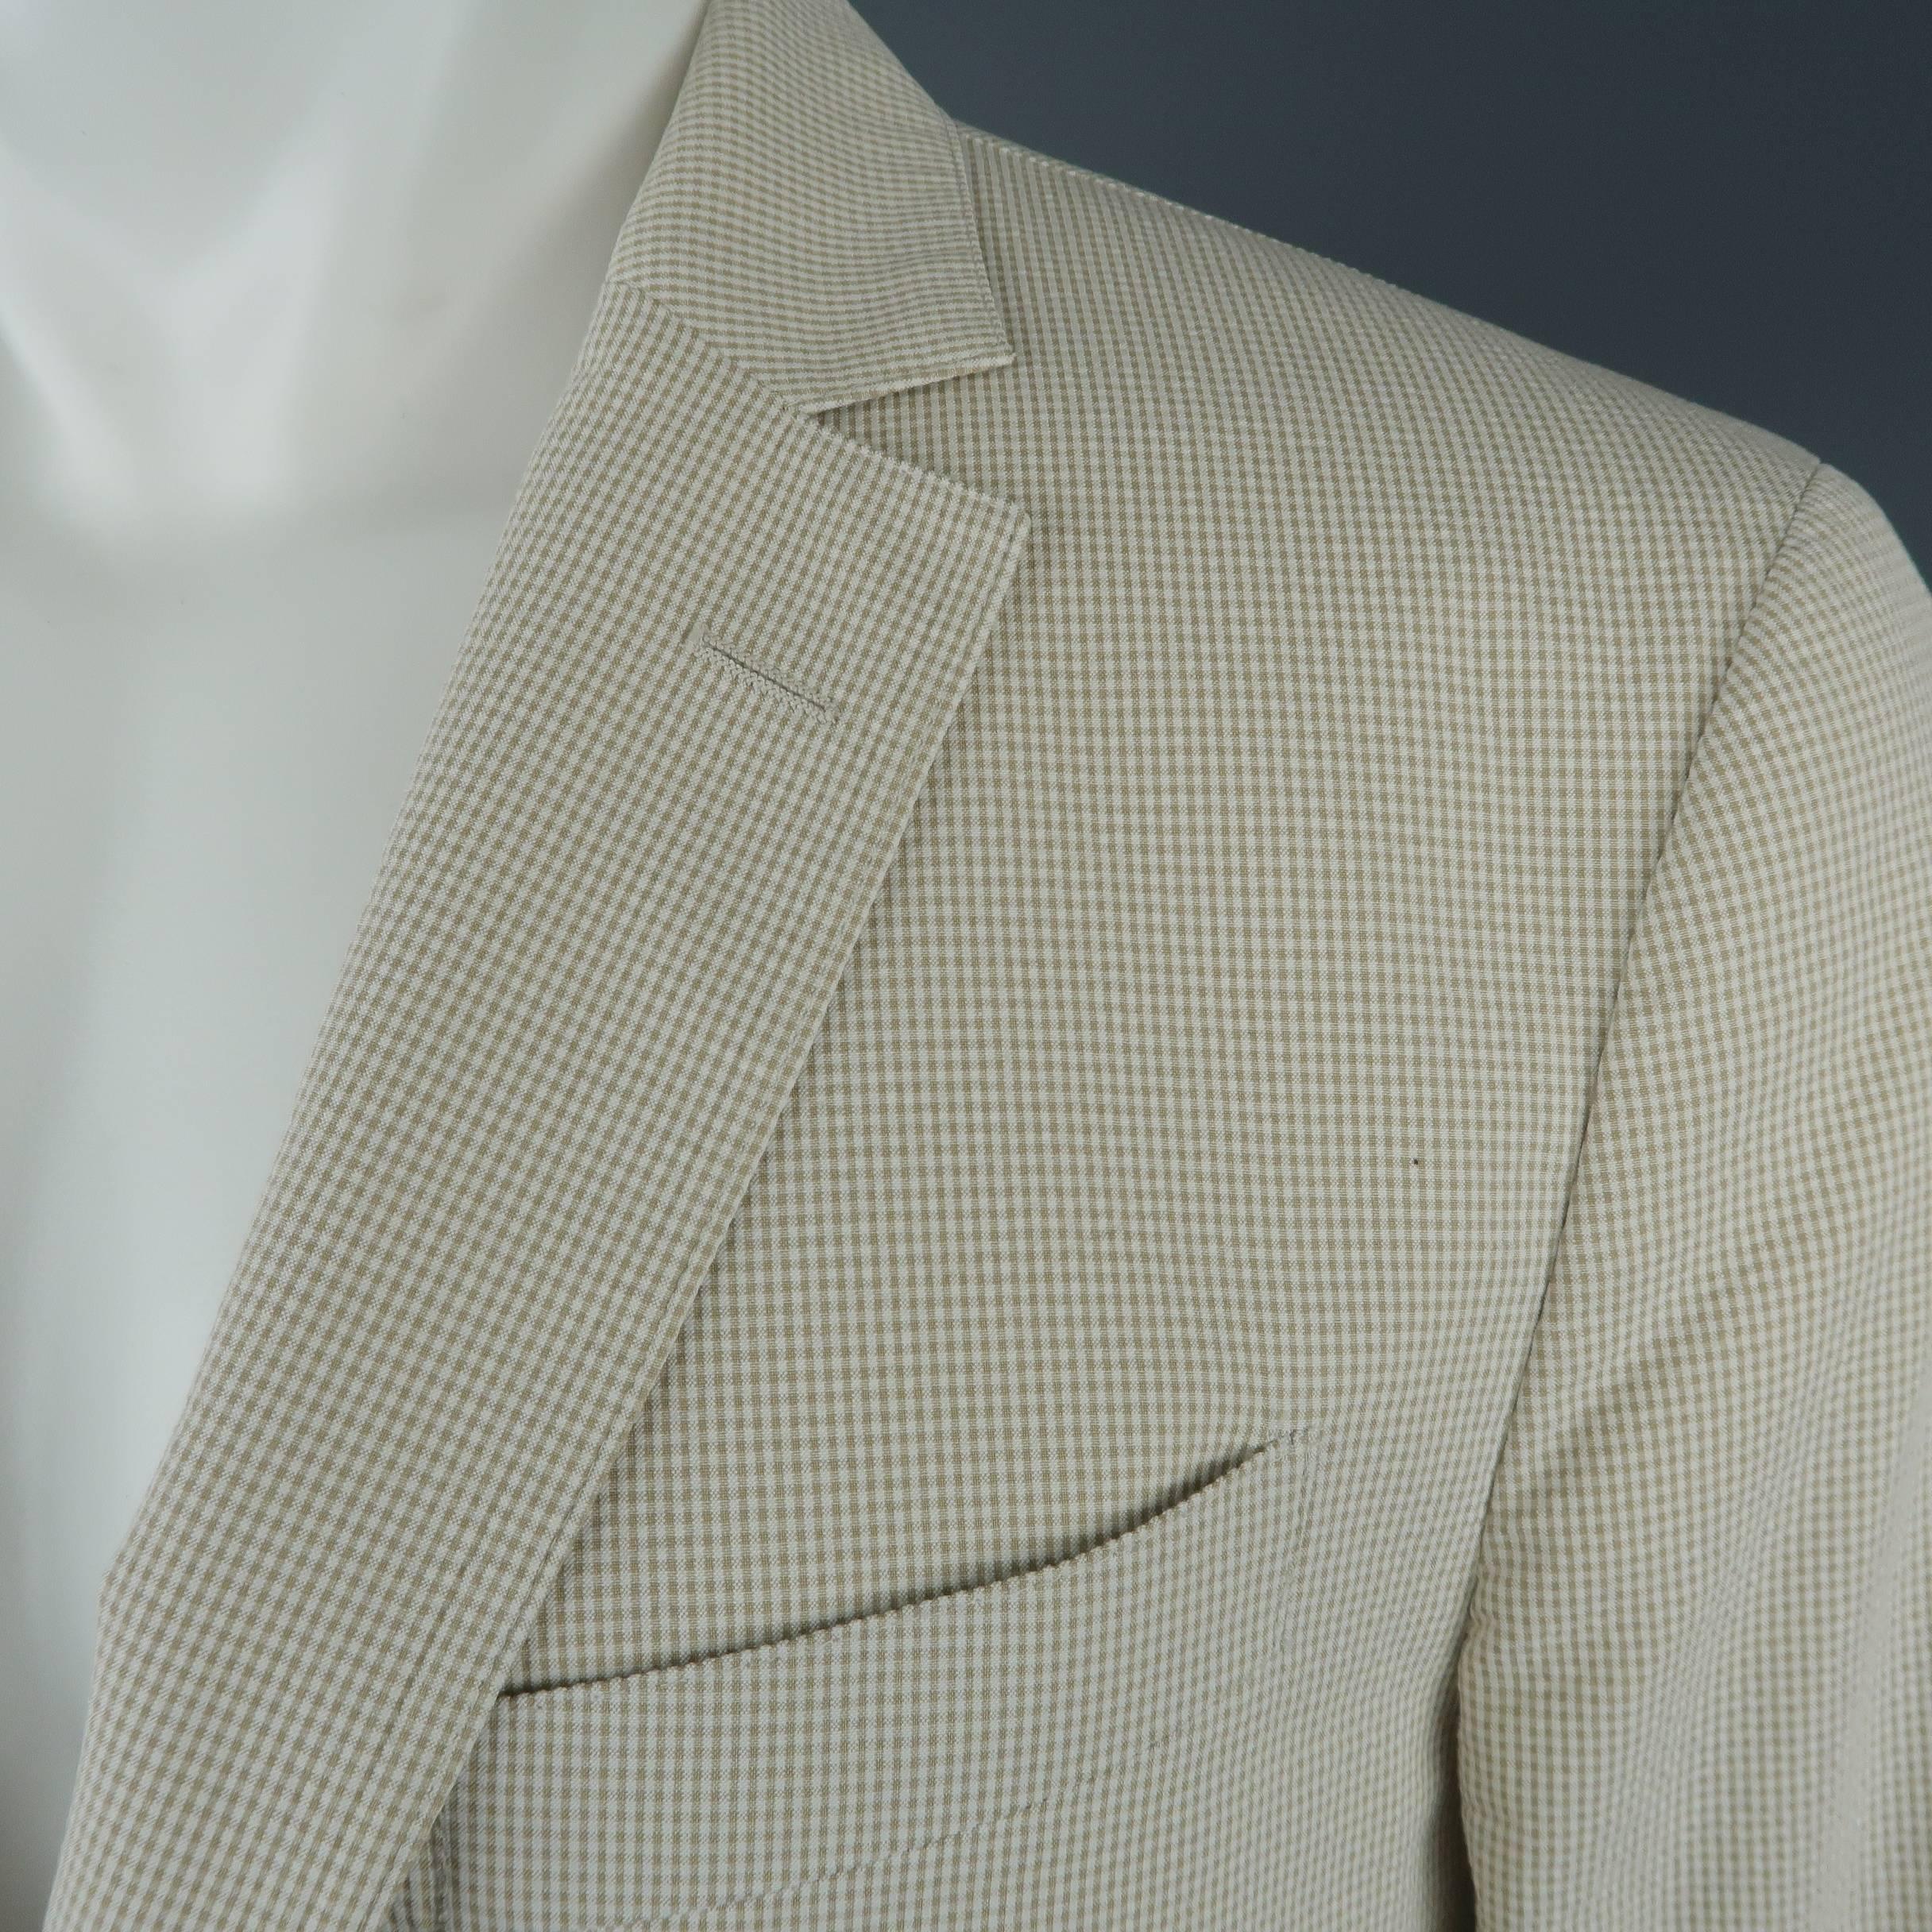 Single breasted SALVATORE FERRAGAMO sport coat comes in a light weight cream and khaki micro-gingham print textured cotton with a notch lapel, two button front, and single vented back. Made in Italy.
 
Excellent Pre-Owned Condition.
Marked: IT 50